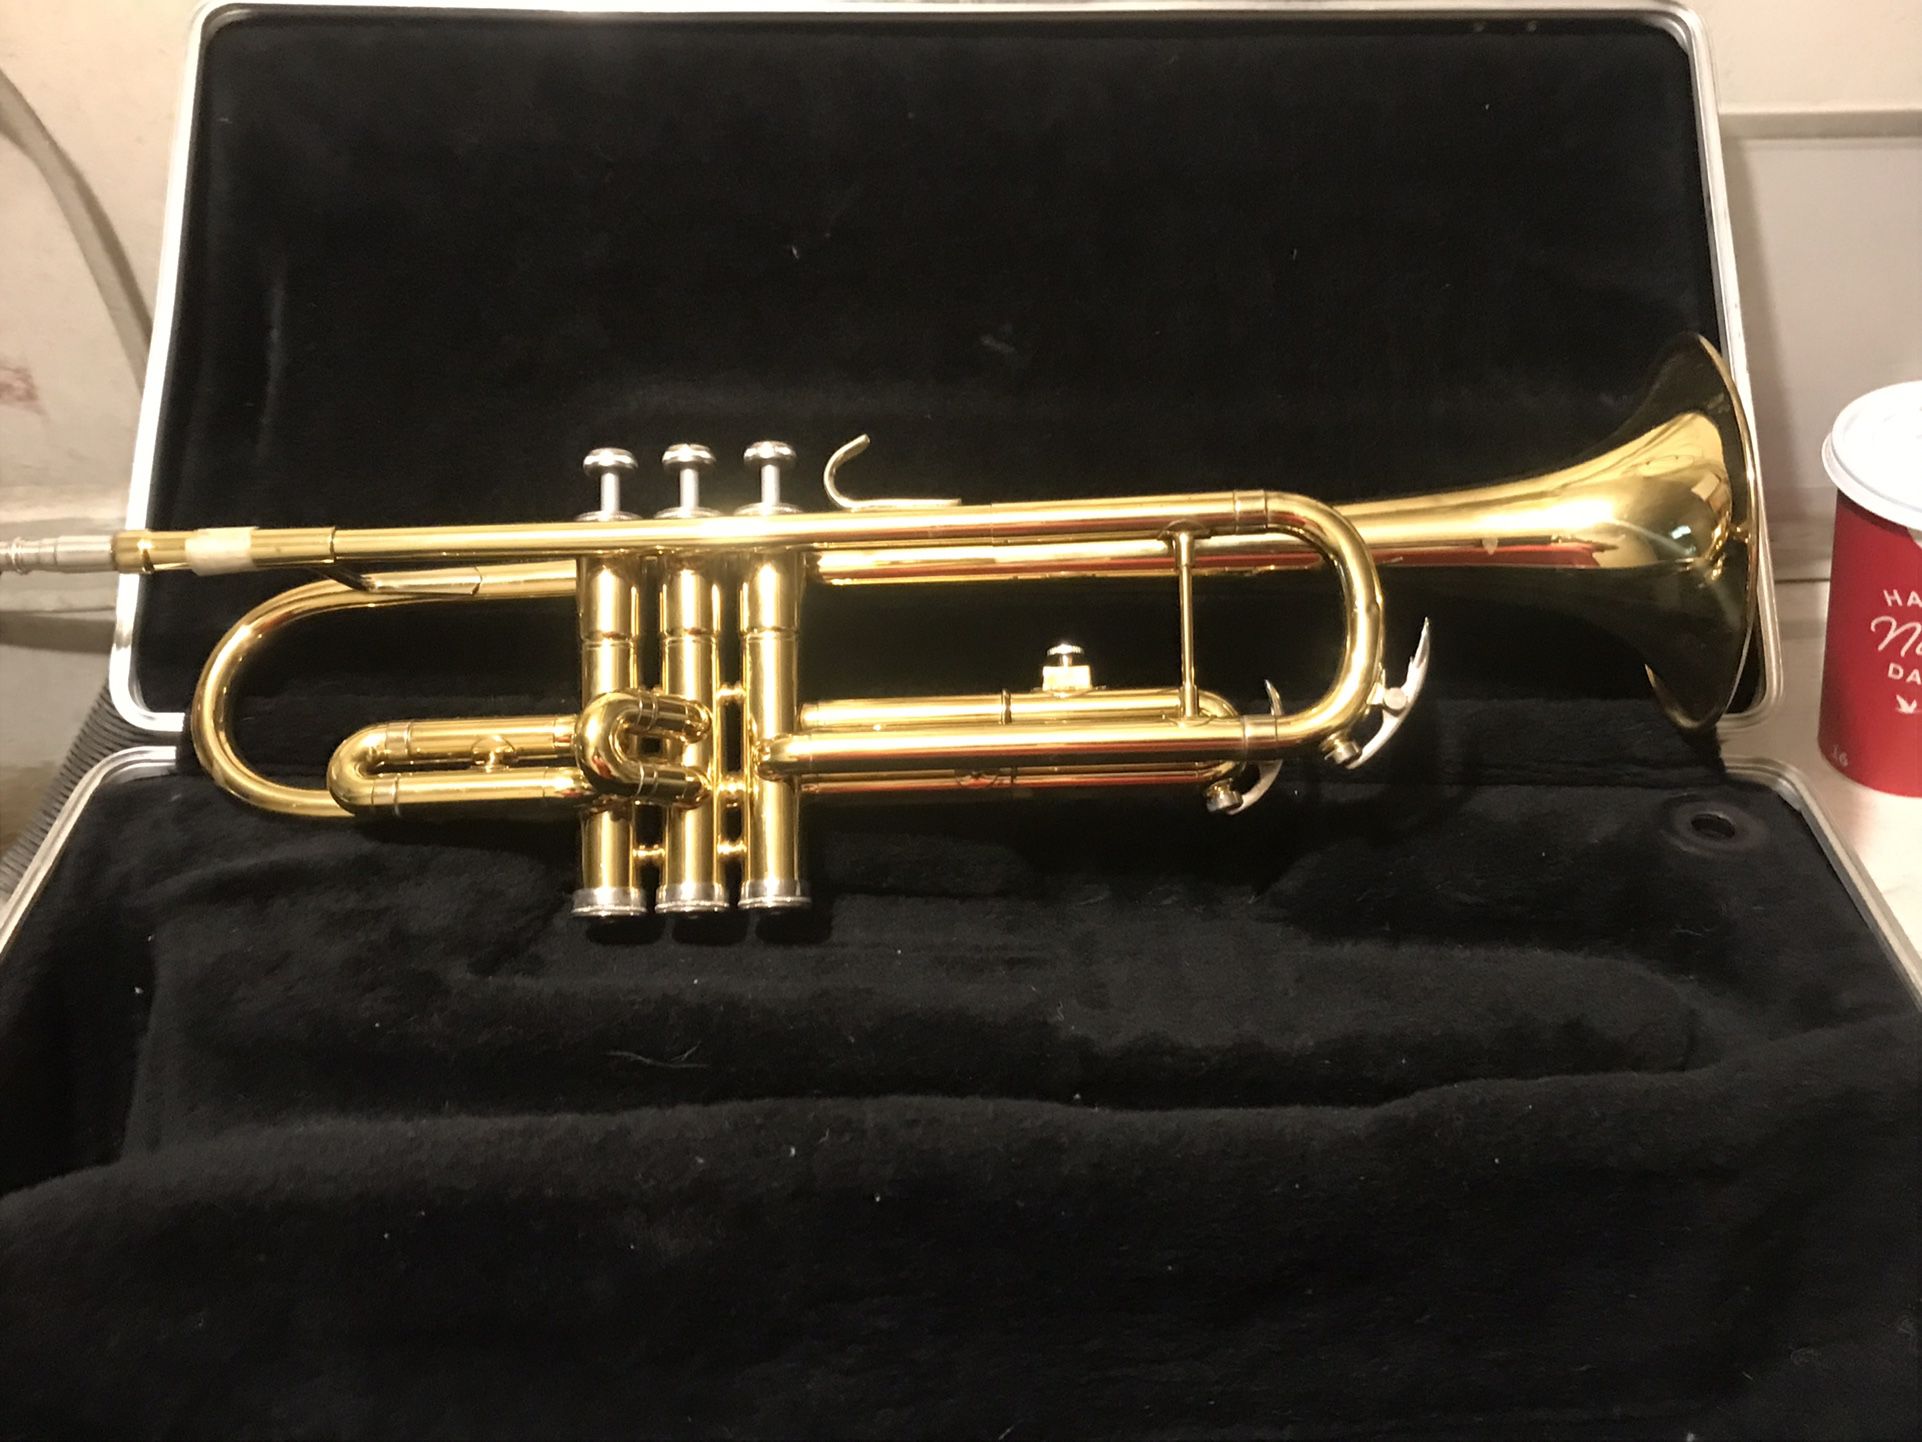  Trumpet With Hard Carrying Case 25years Old 